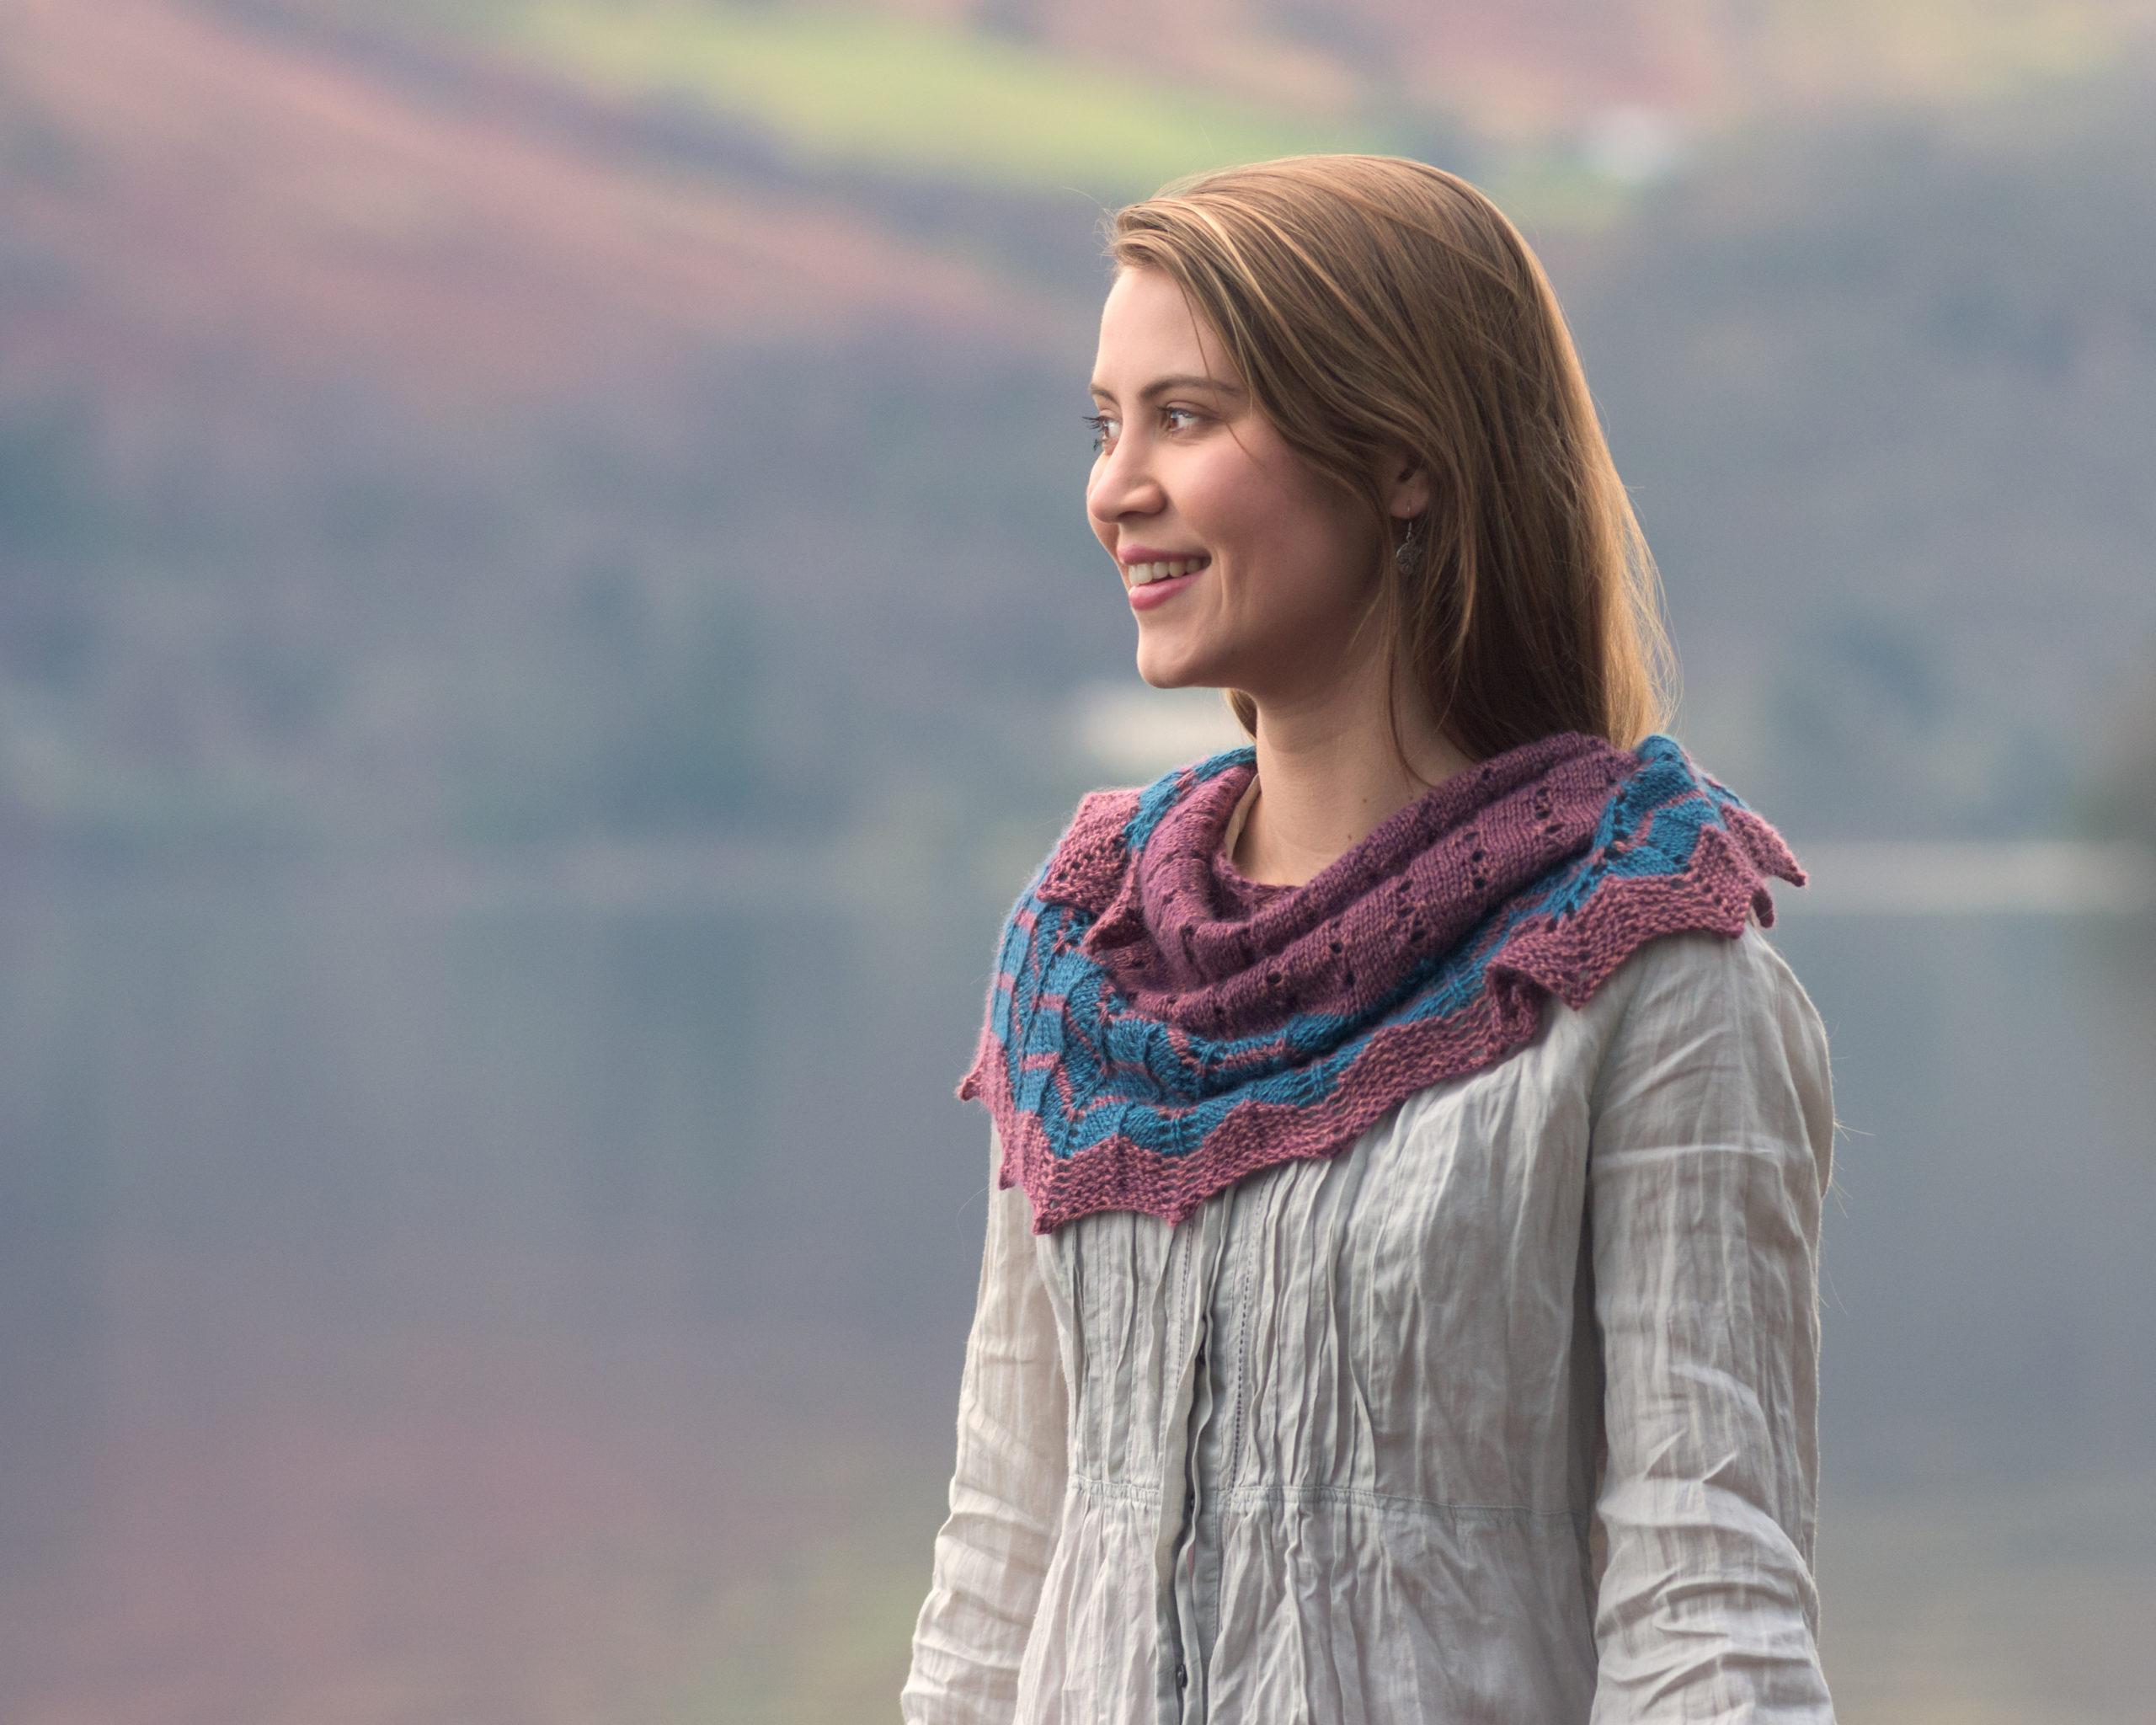 The Tobermory Shawl, designed by Helen Stewart of Curious Handmade